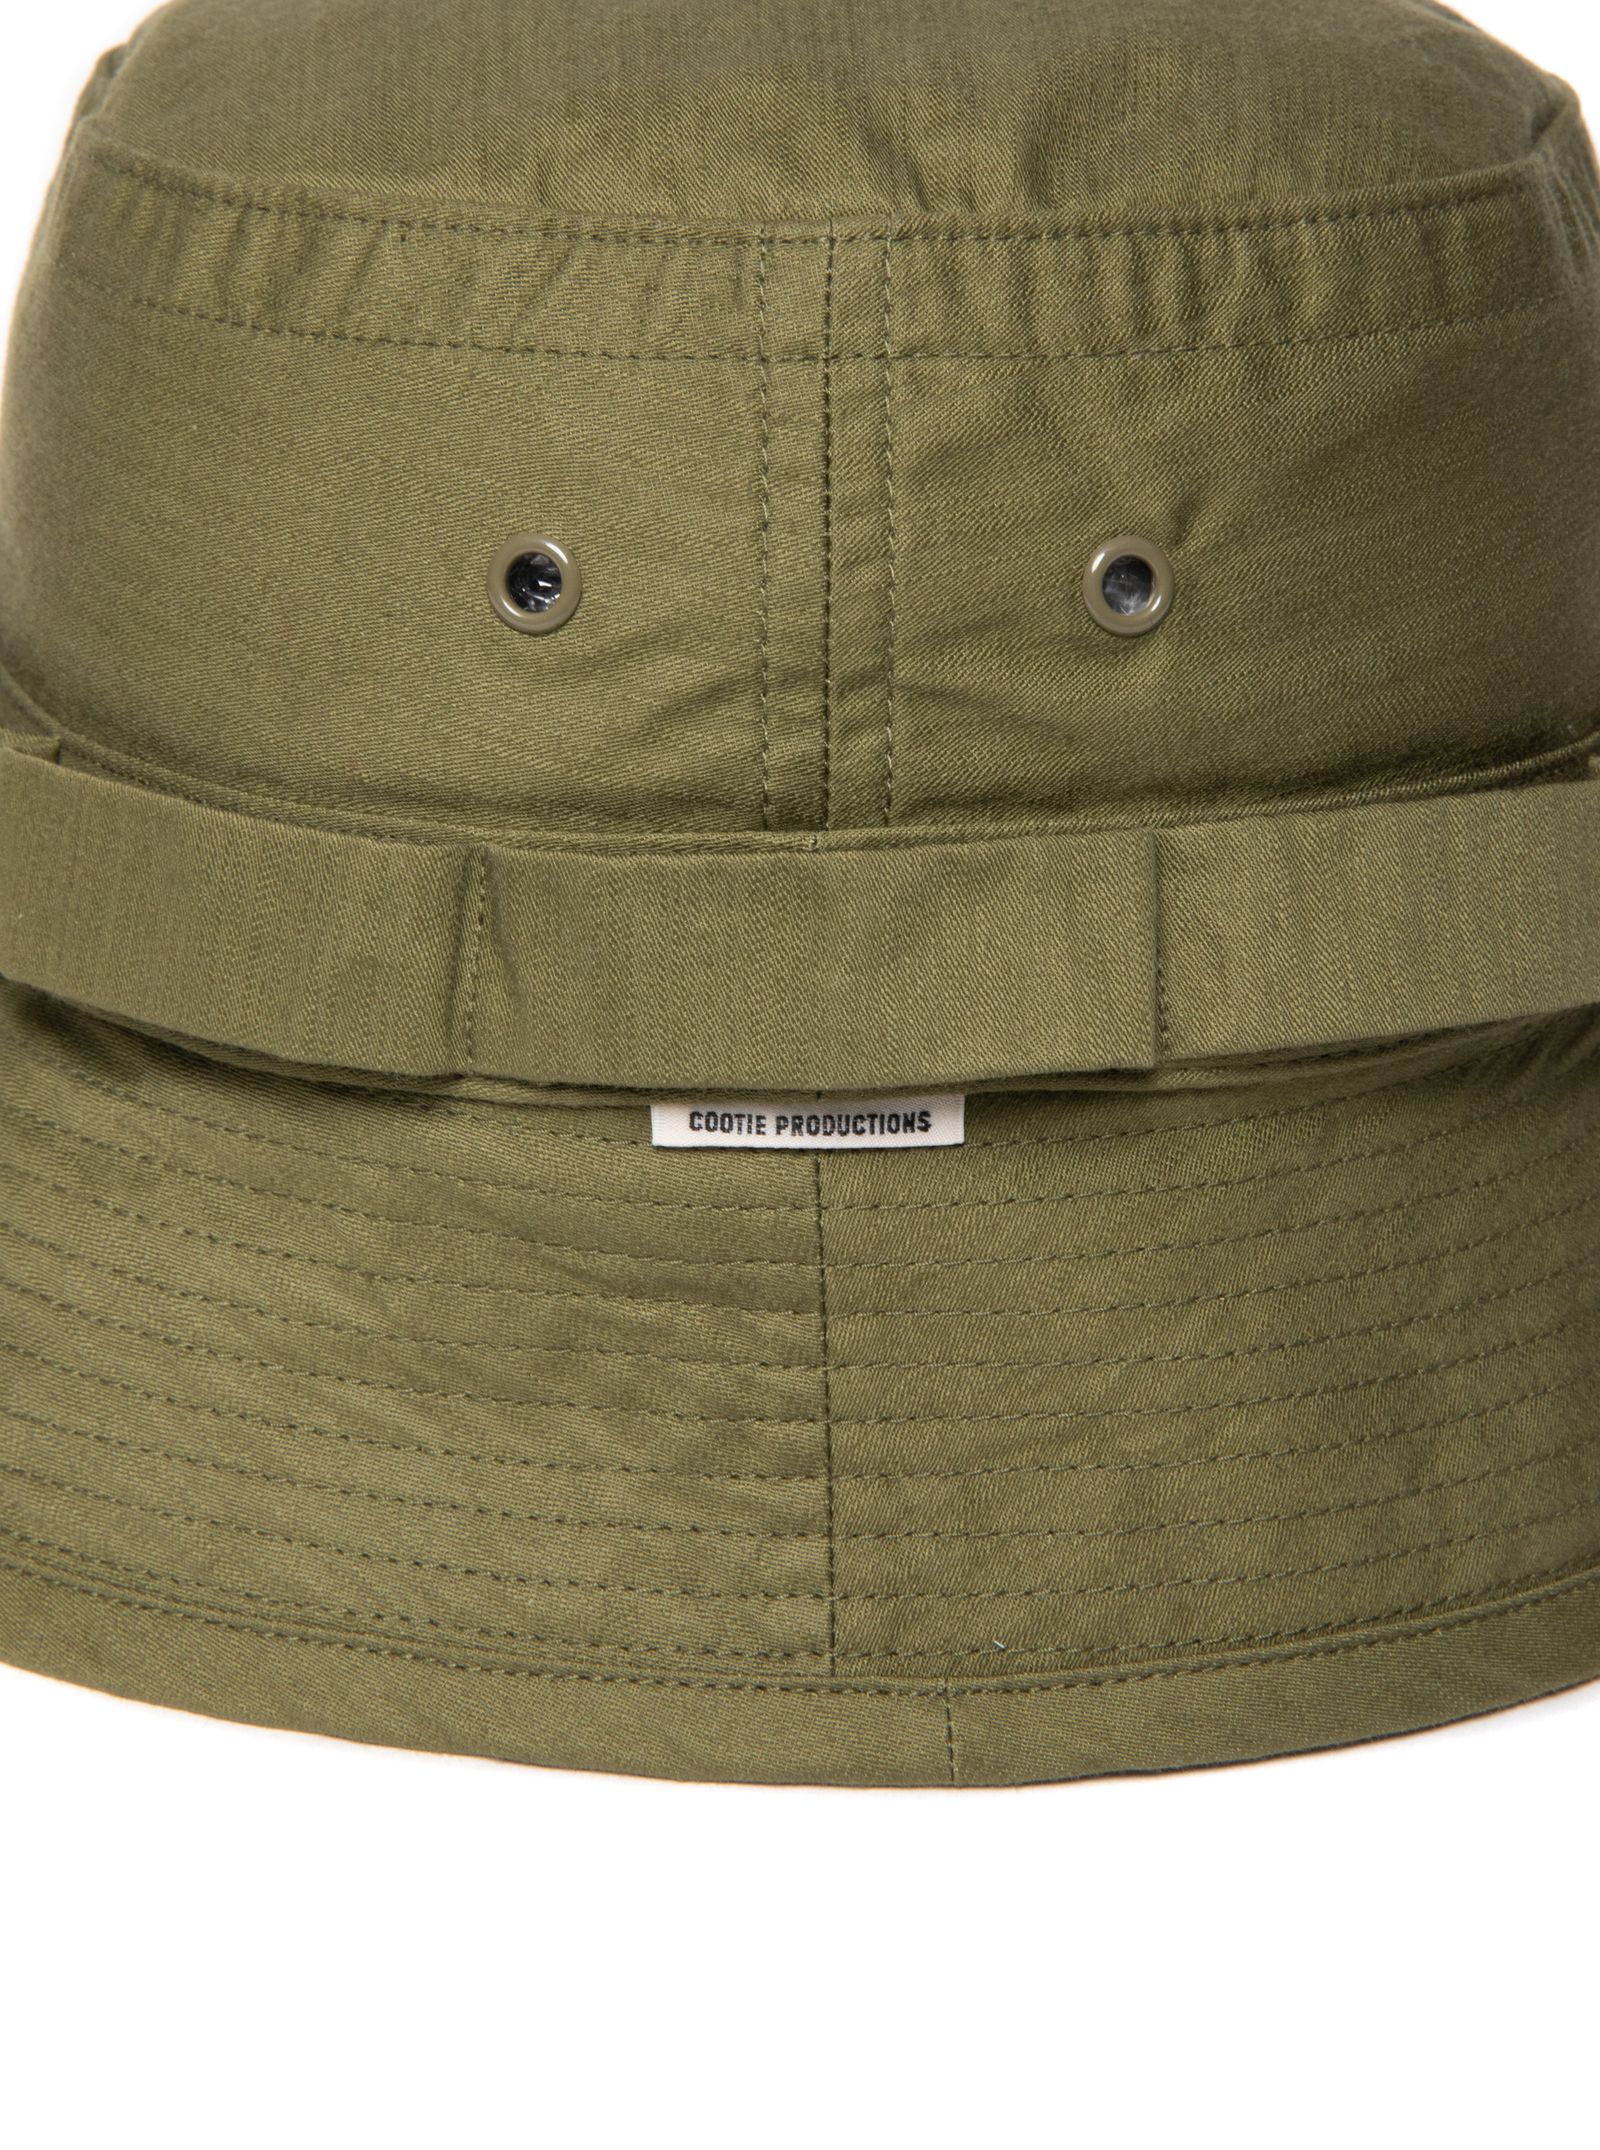 COOTIE PRODUCTIONS - Back Satin Boonie Bucket Hat (OLIVE 